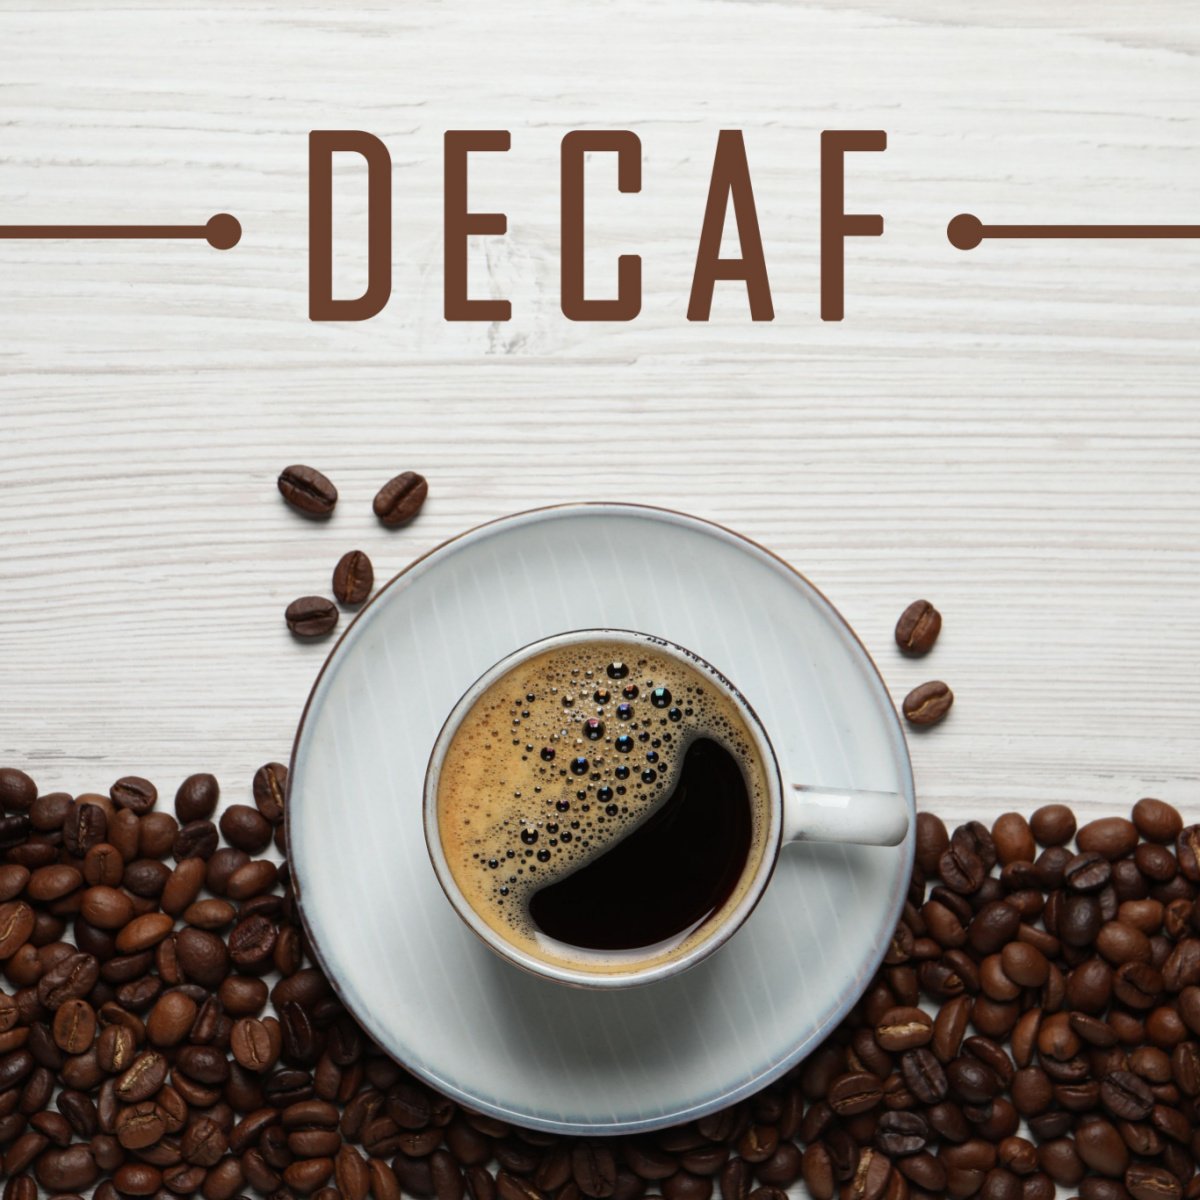 a cup of decaf coffee with coffee beans on wooden table resized